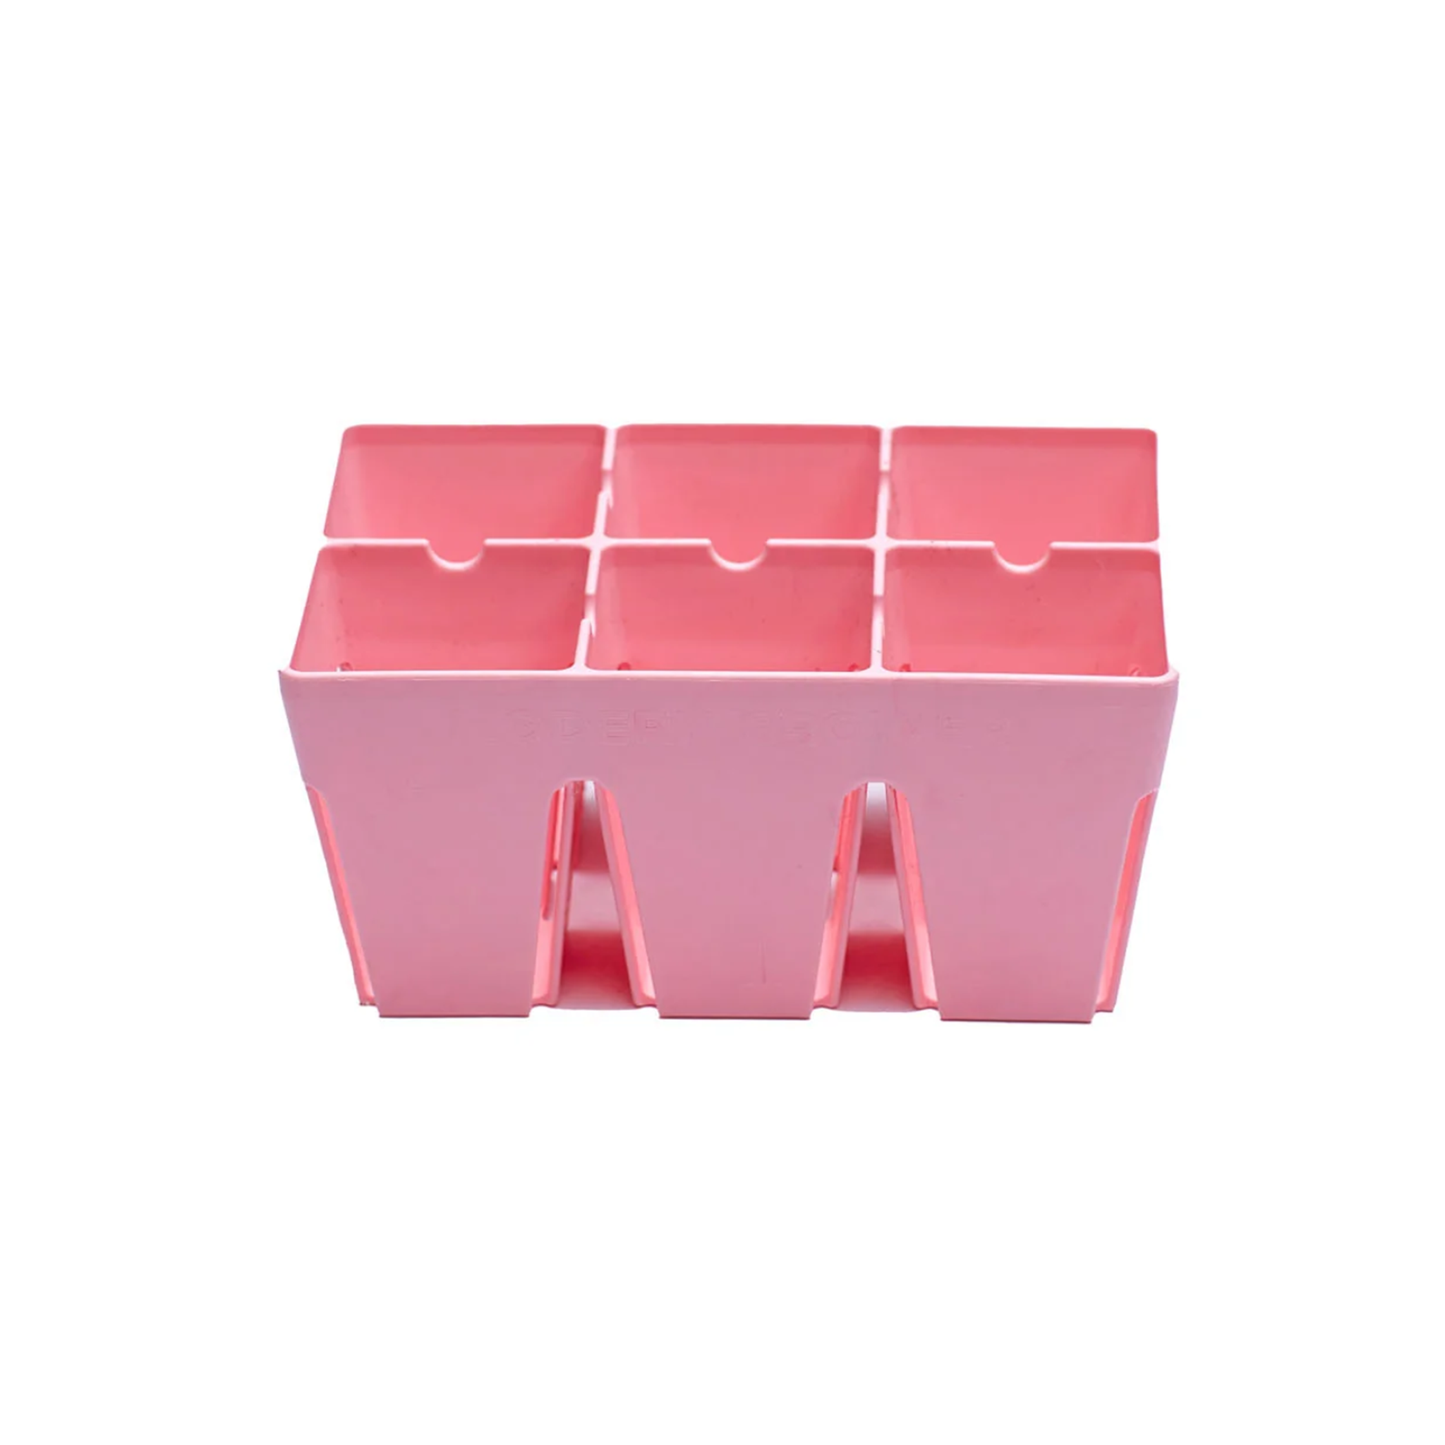 Epic 6-Cell Seed Starting Trays - Pink